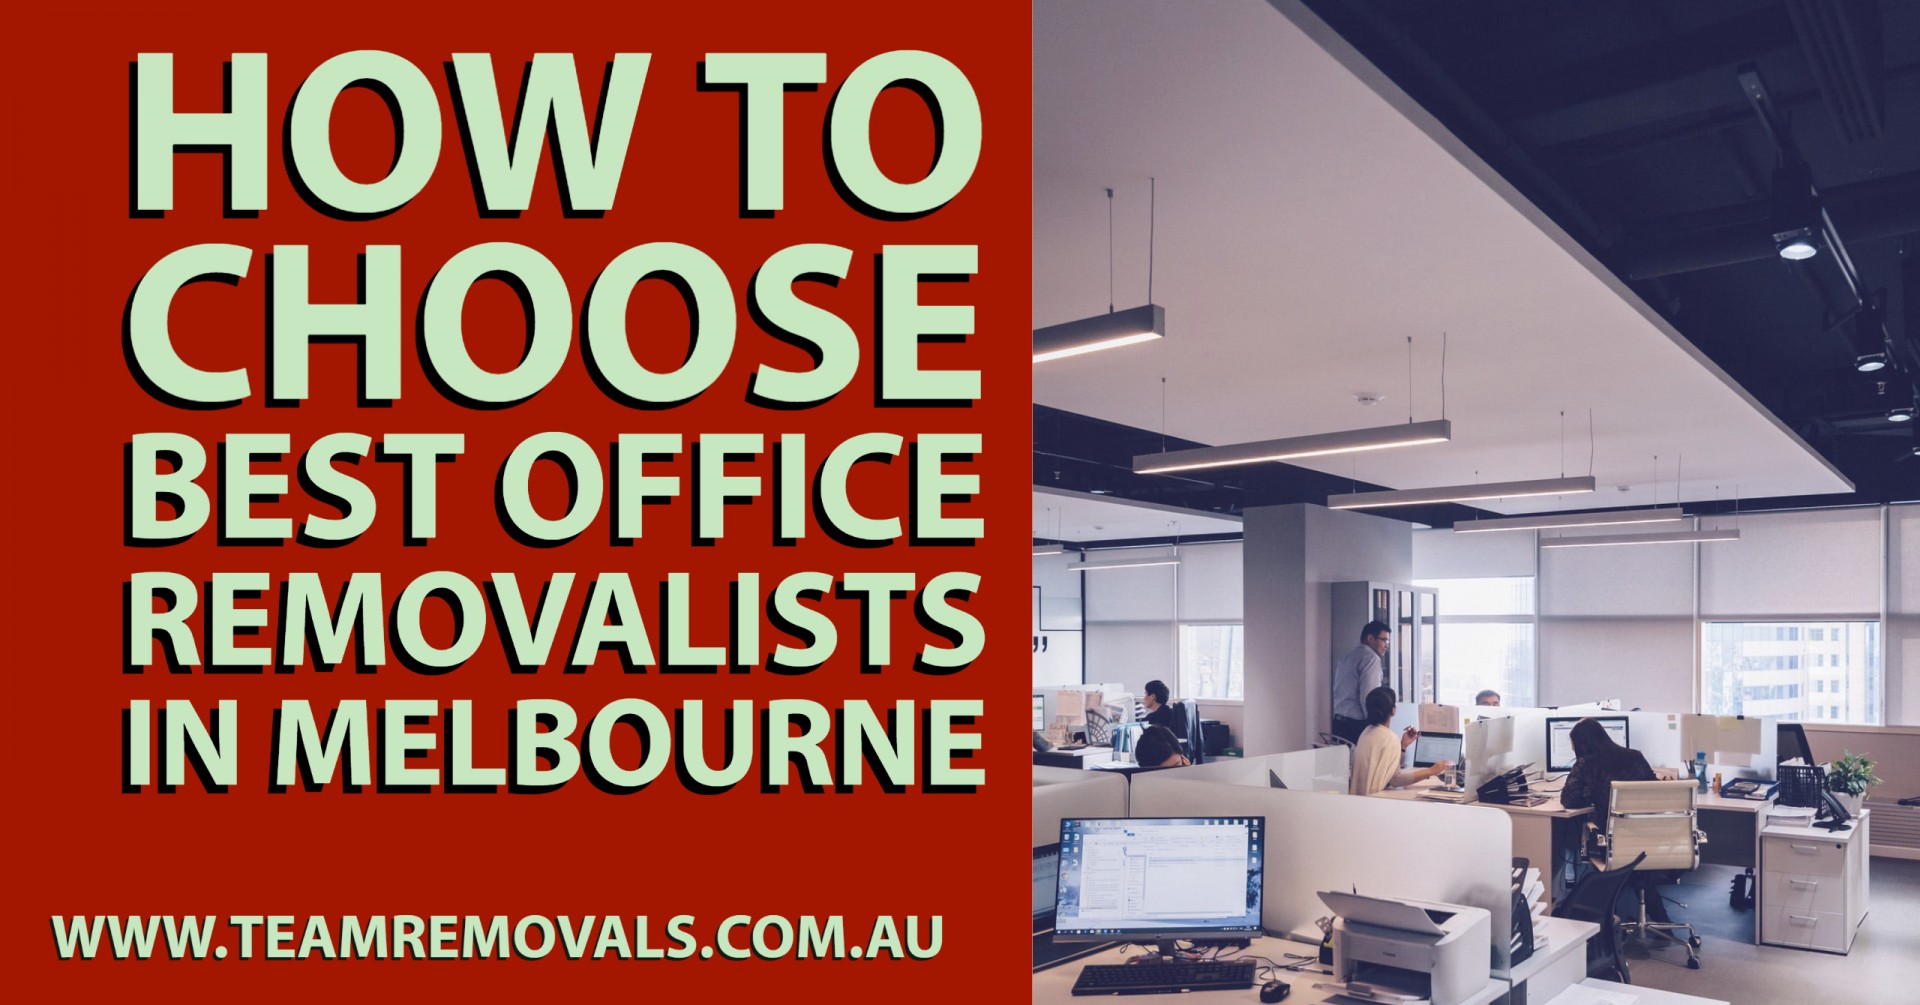 How to Choose Best Office Removalists in Melbourne